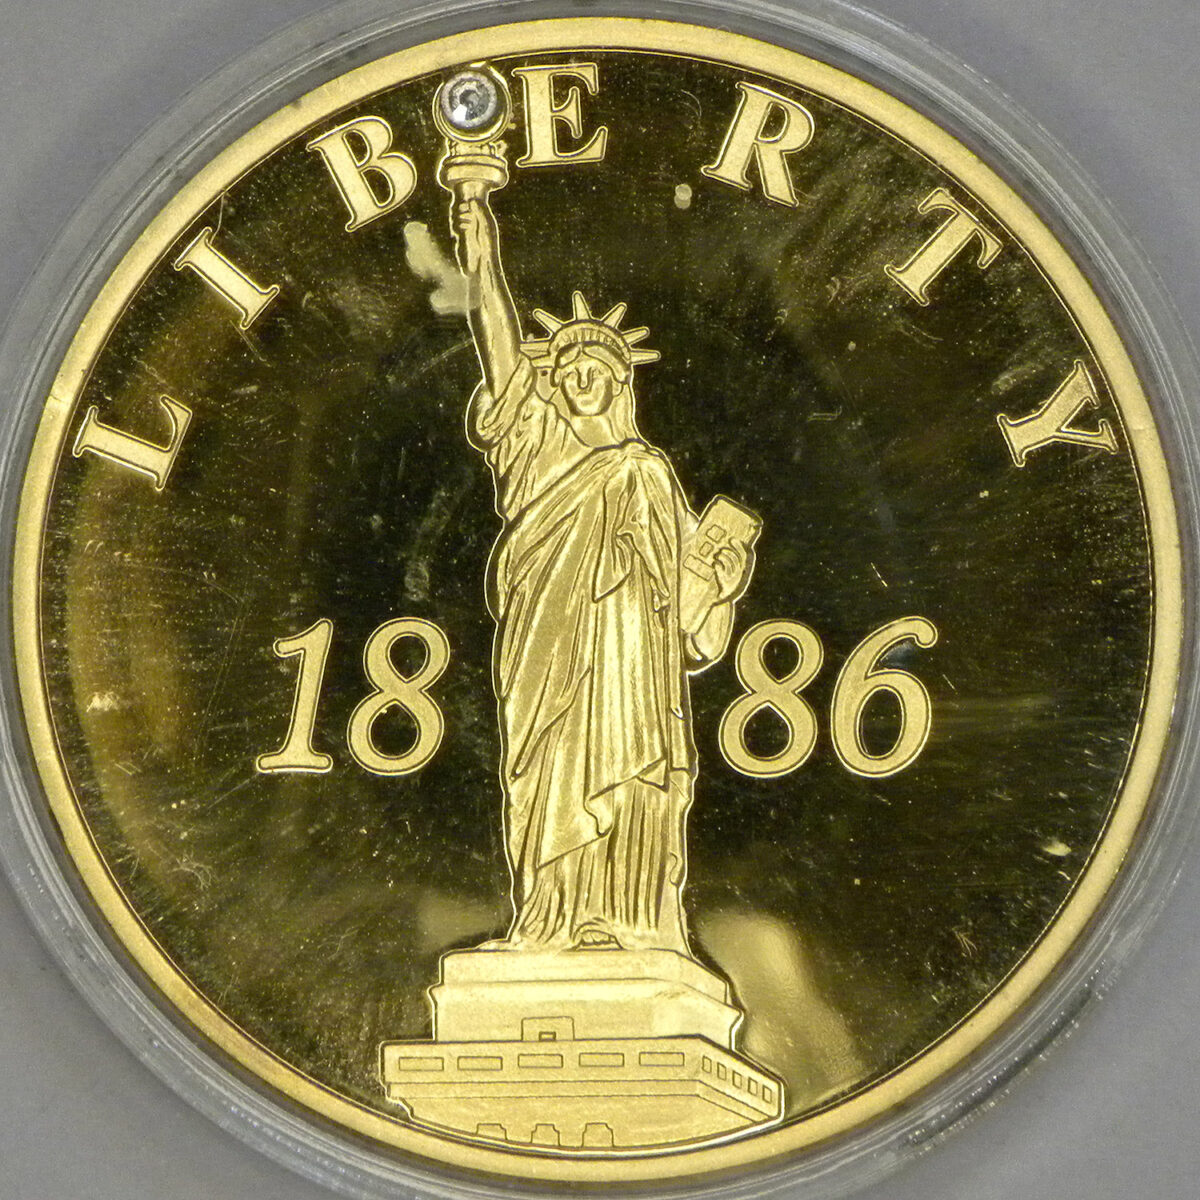 Statue of Liberty 125th Anniversary medal (obverse)